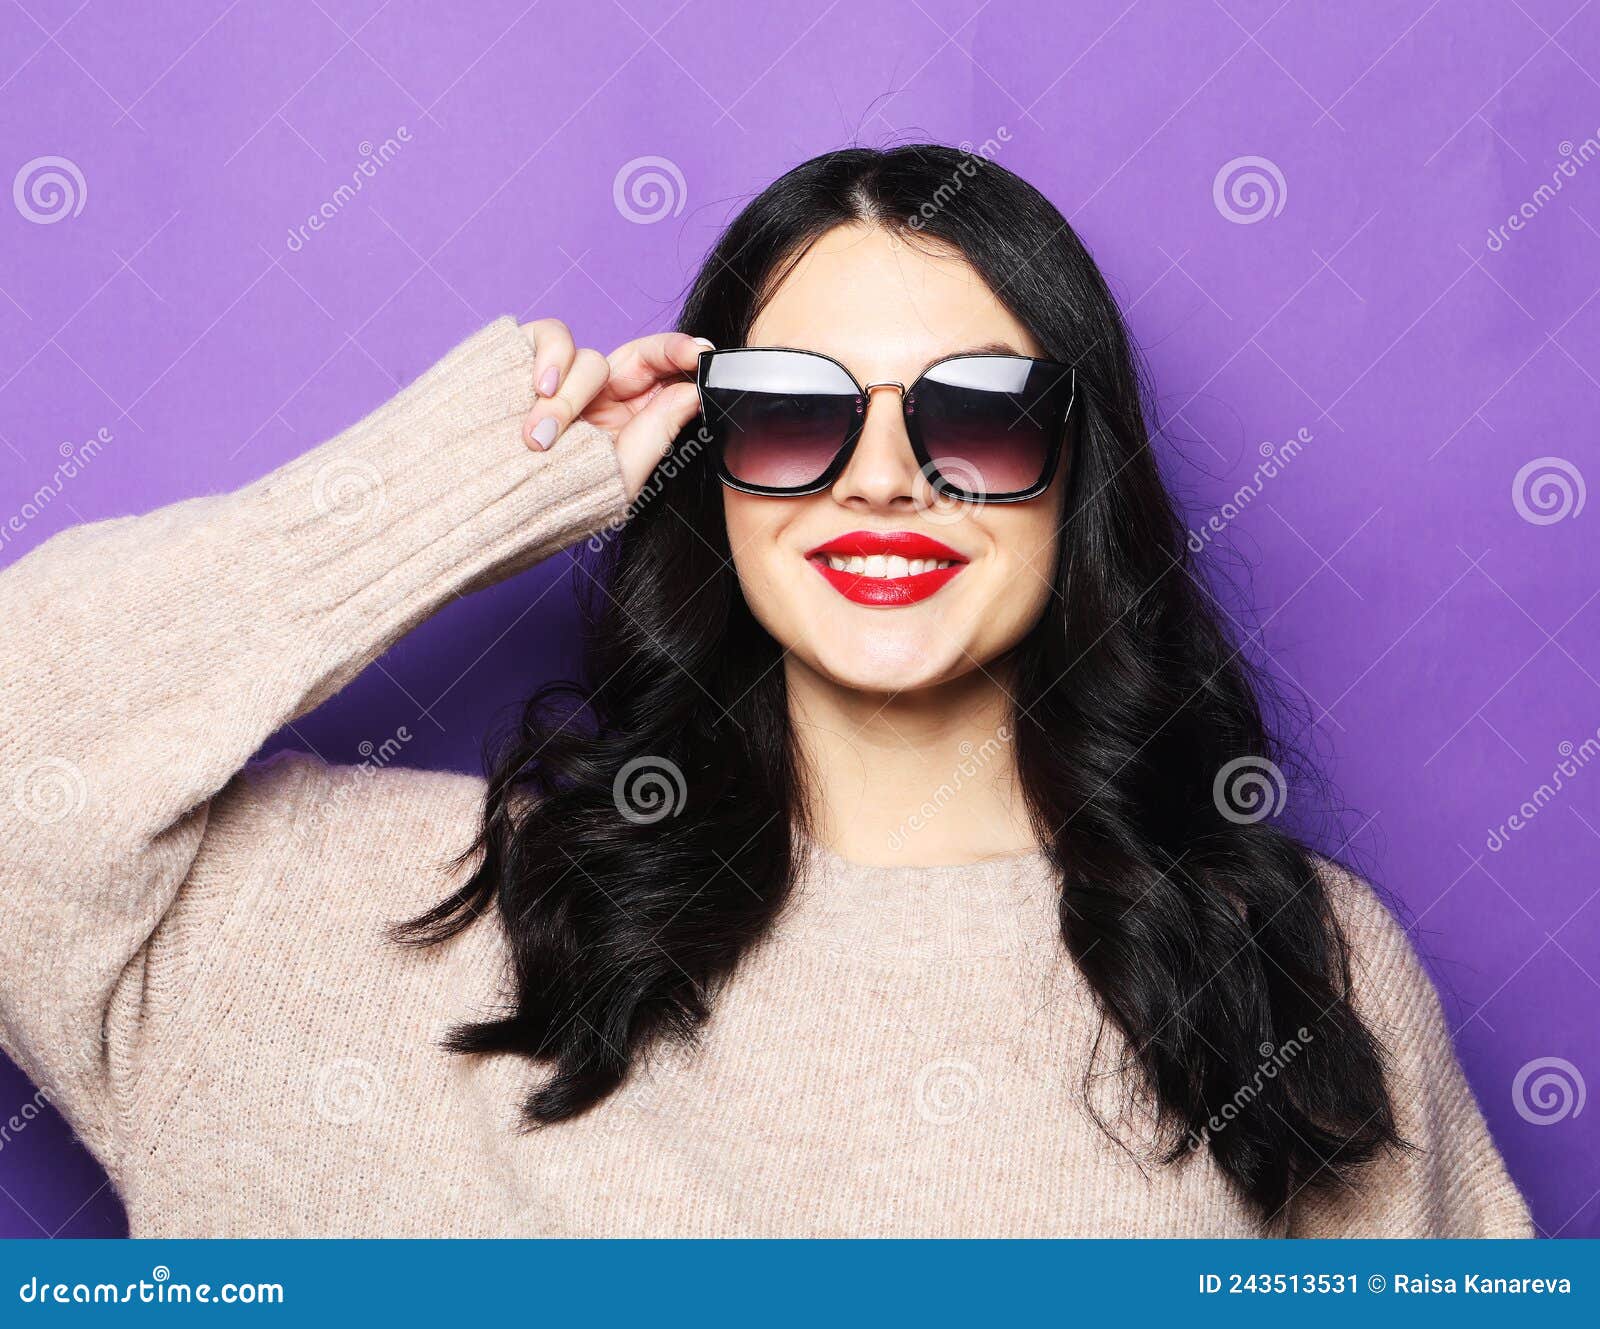 Charming Woman with Long Curly Hairstyle Wearing Trendy Sunglasses ...